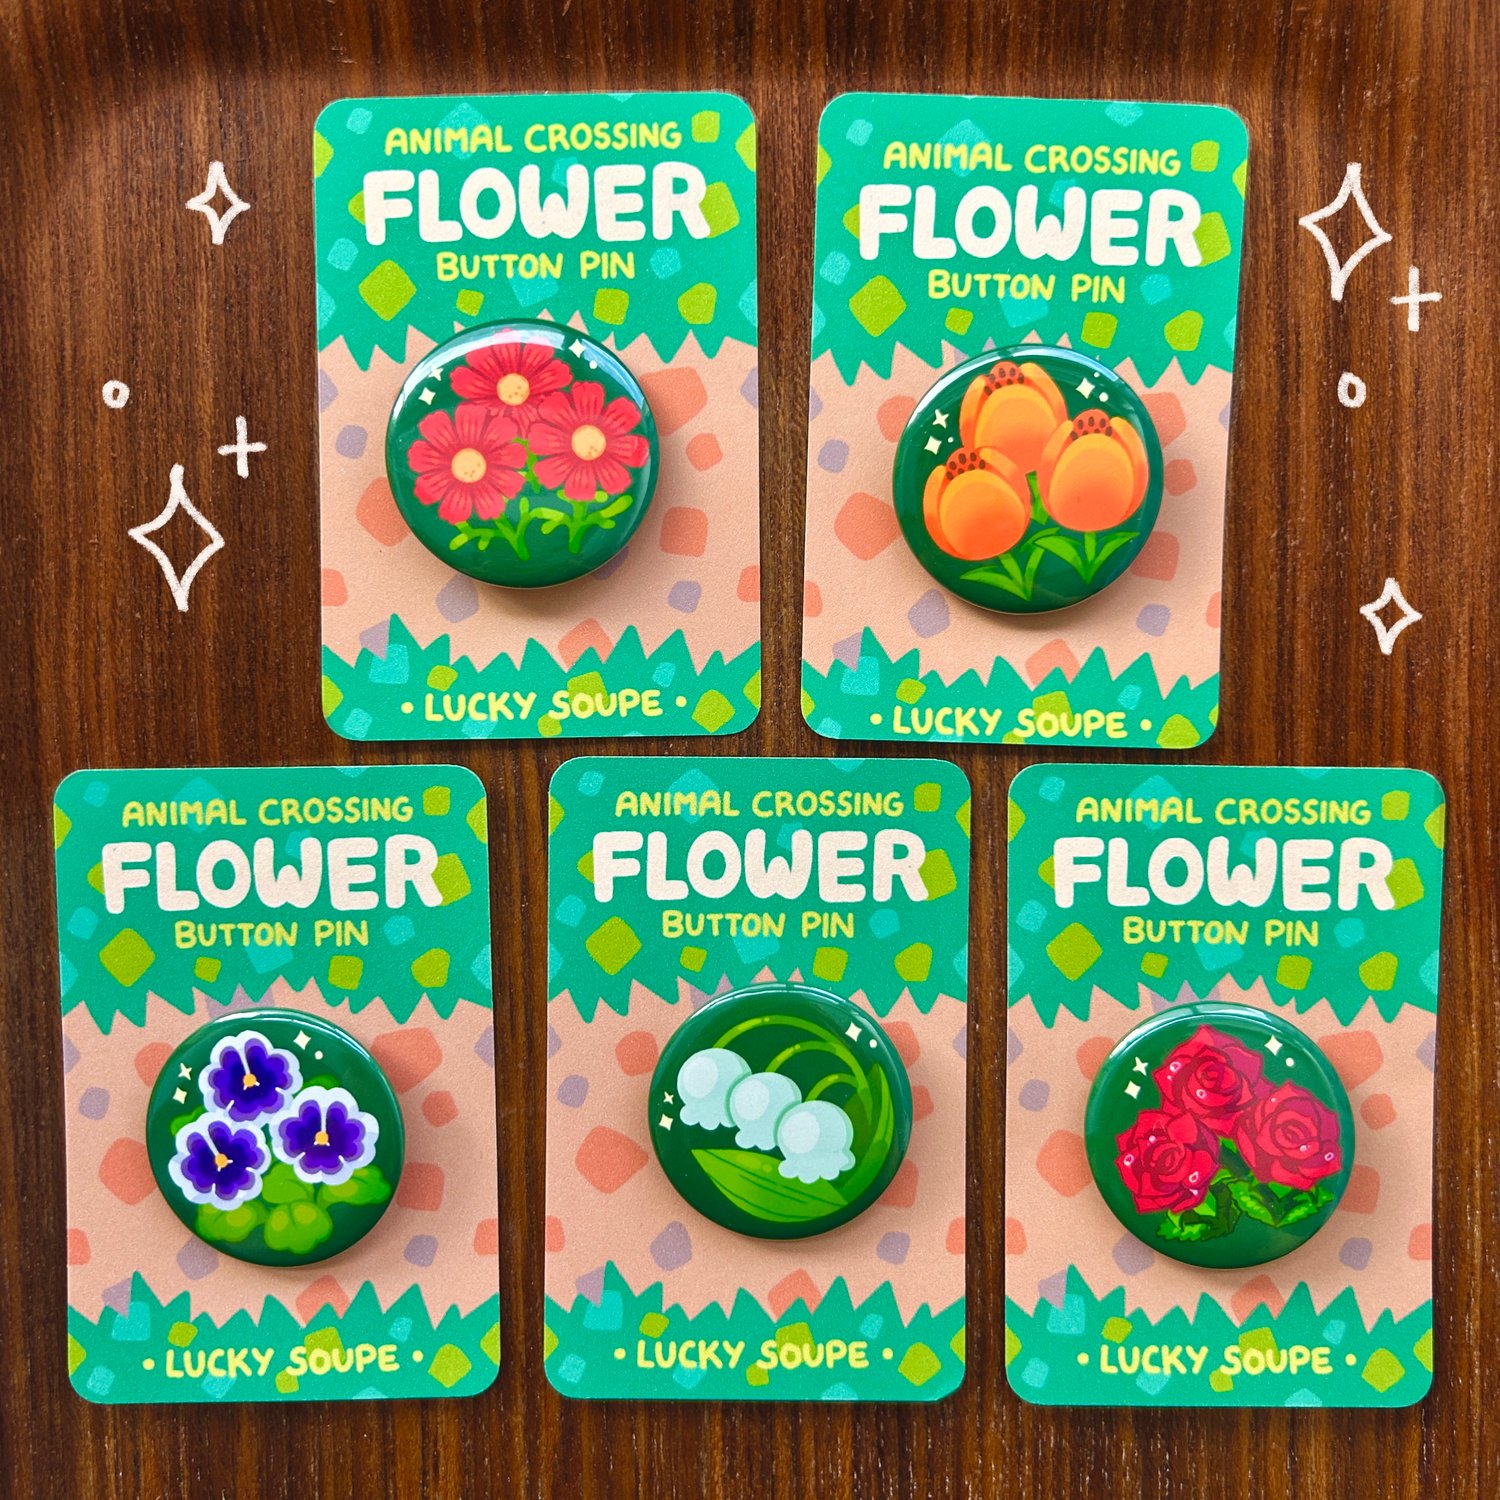 Animal Crossing Flower Button Pins